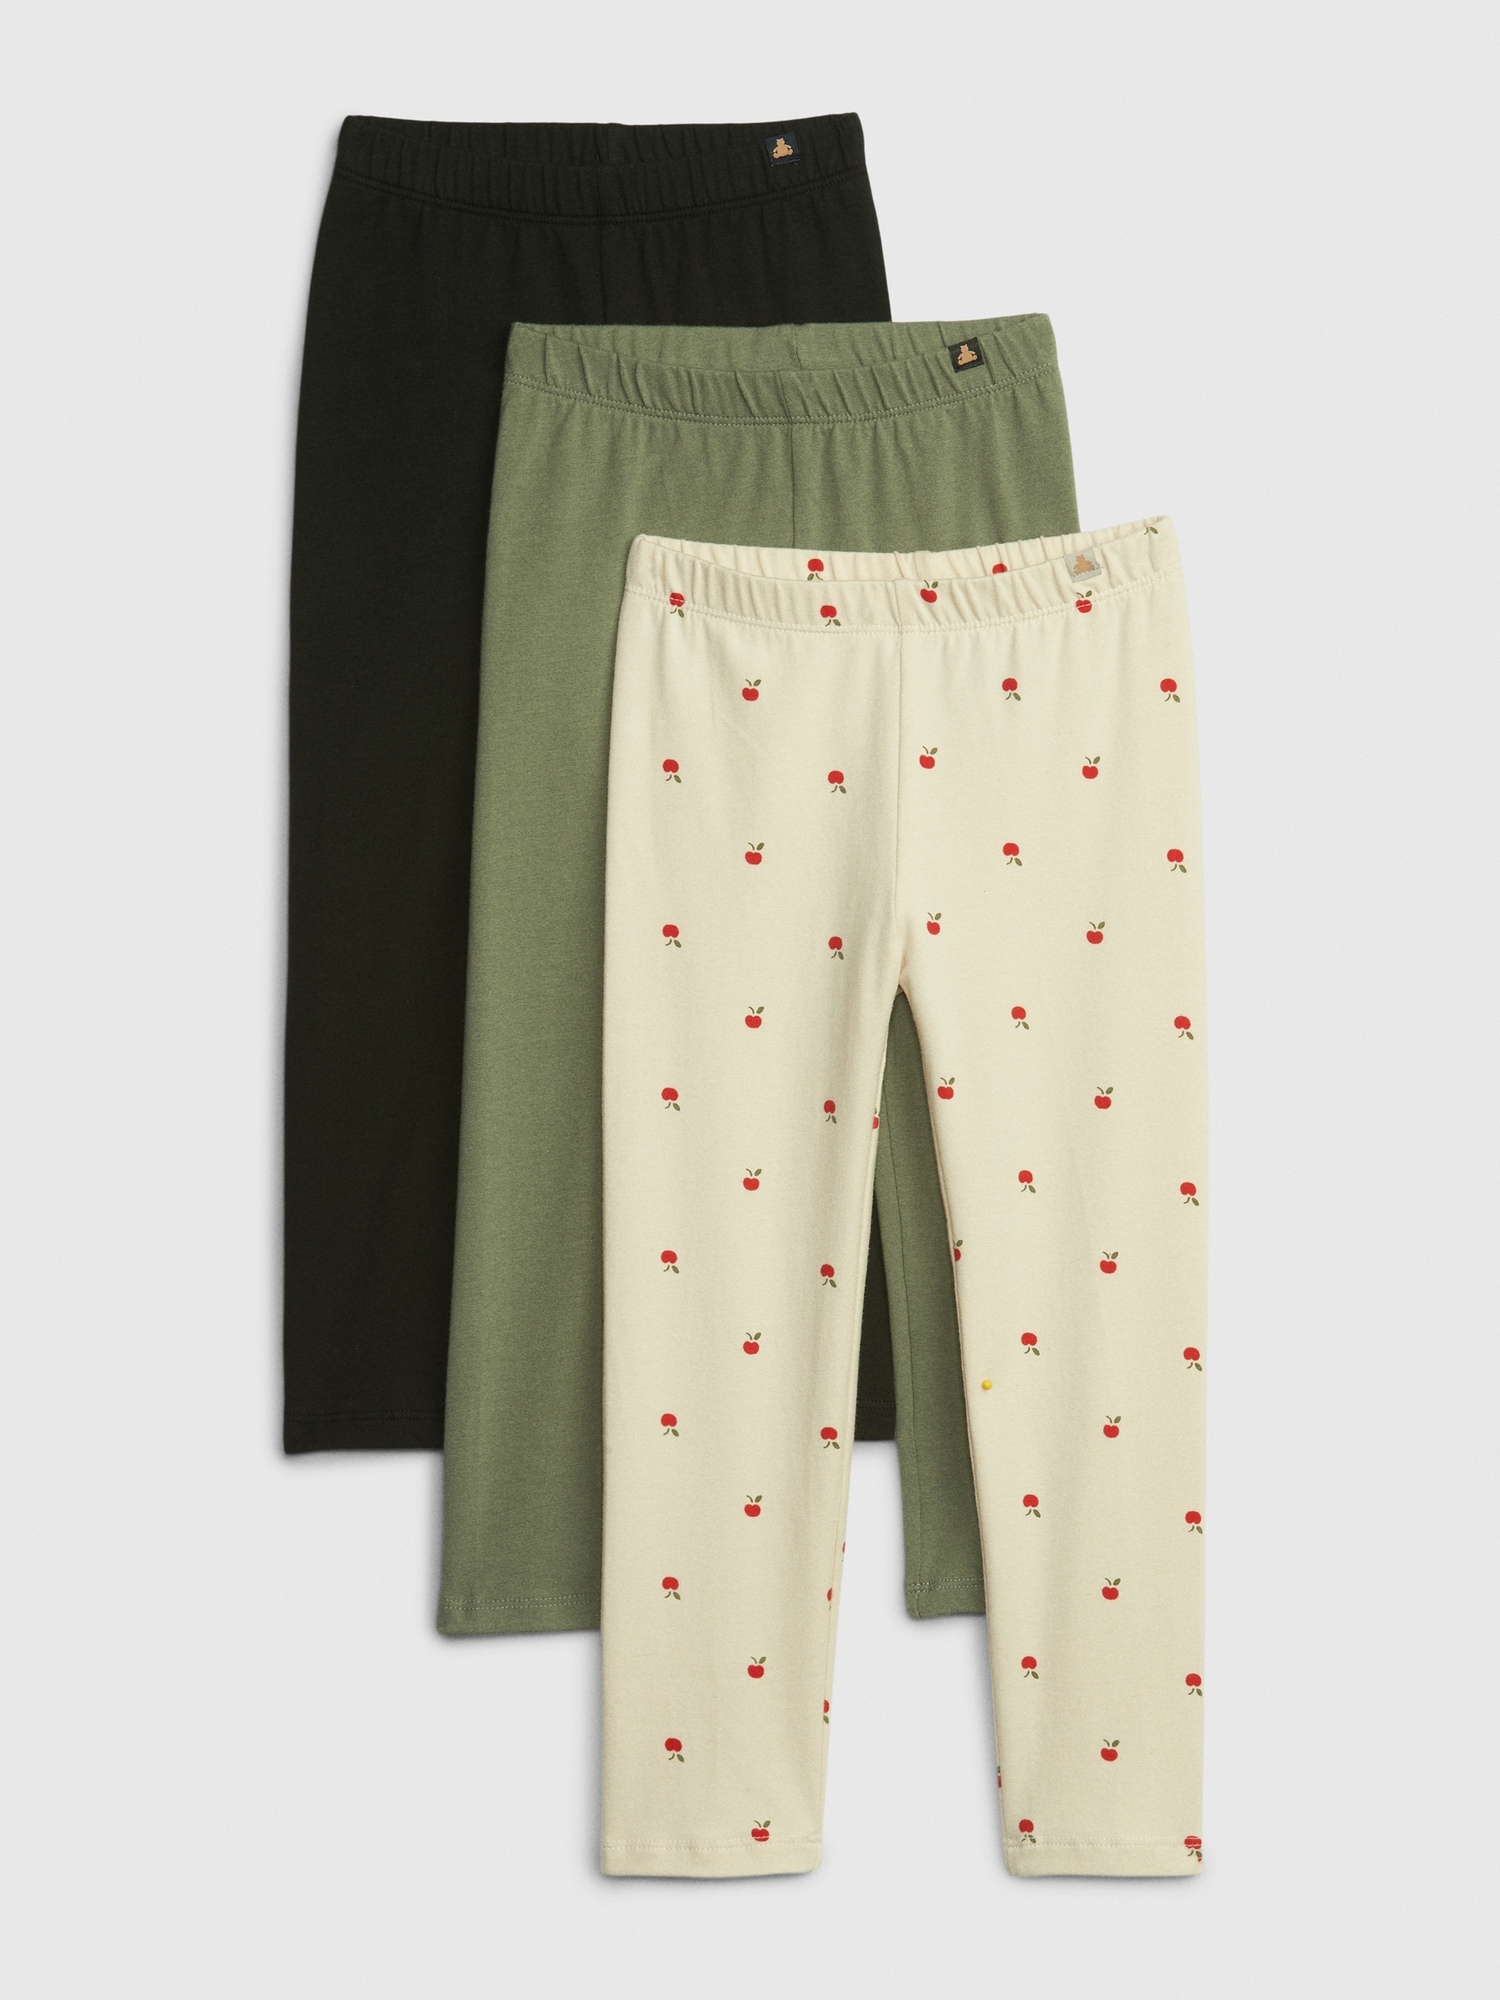 Gap Toddler Mix and Match Leggings (3-Pack)